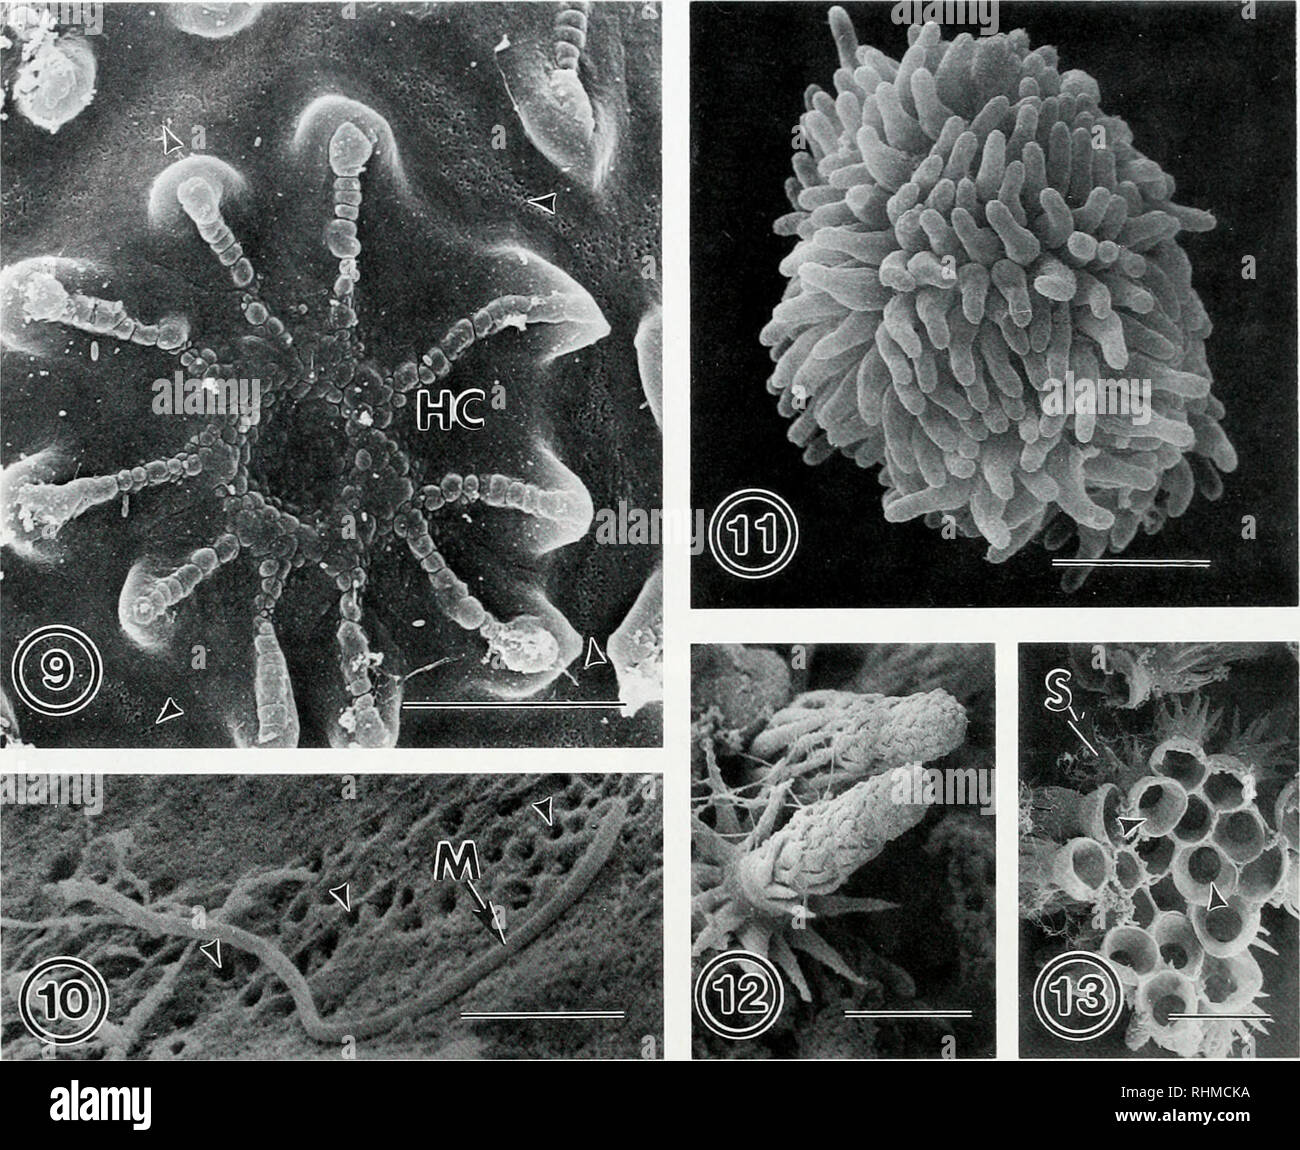 . The Biological bulletin. Biology; Zoology; Biology; Marine Biology. 274 J. BUCKLAND-NICKS. Figure 9. S.E.M. of closed hull cupule (HC) of Lepidochitona fcrnaldi egg. showing reduction typical of brooders. Regular series of micropores is visible in intercupule area (arrowheads). Scale bar = 20 ^m. Figure 10. S.E.M. ofL.fernuldi egg showing elongate microvillus (arrow), extending from one of a series of micropores in the intercupule region (arrowheads). Scale bar = 2 ^m. Figure 11. S.E.M. of Chaetopleiira apiculaia egg showing spinous hull. Scale bar = 100 i*m. Figure 12. S.E.M. of spine of ma Stock Photo